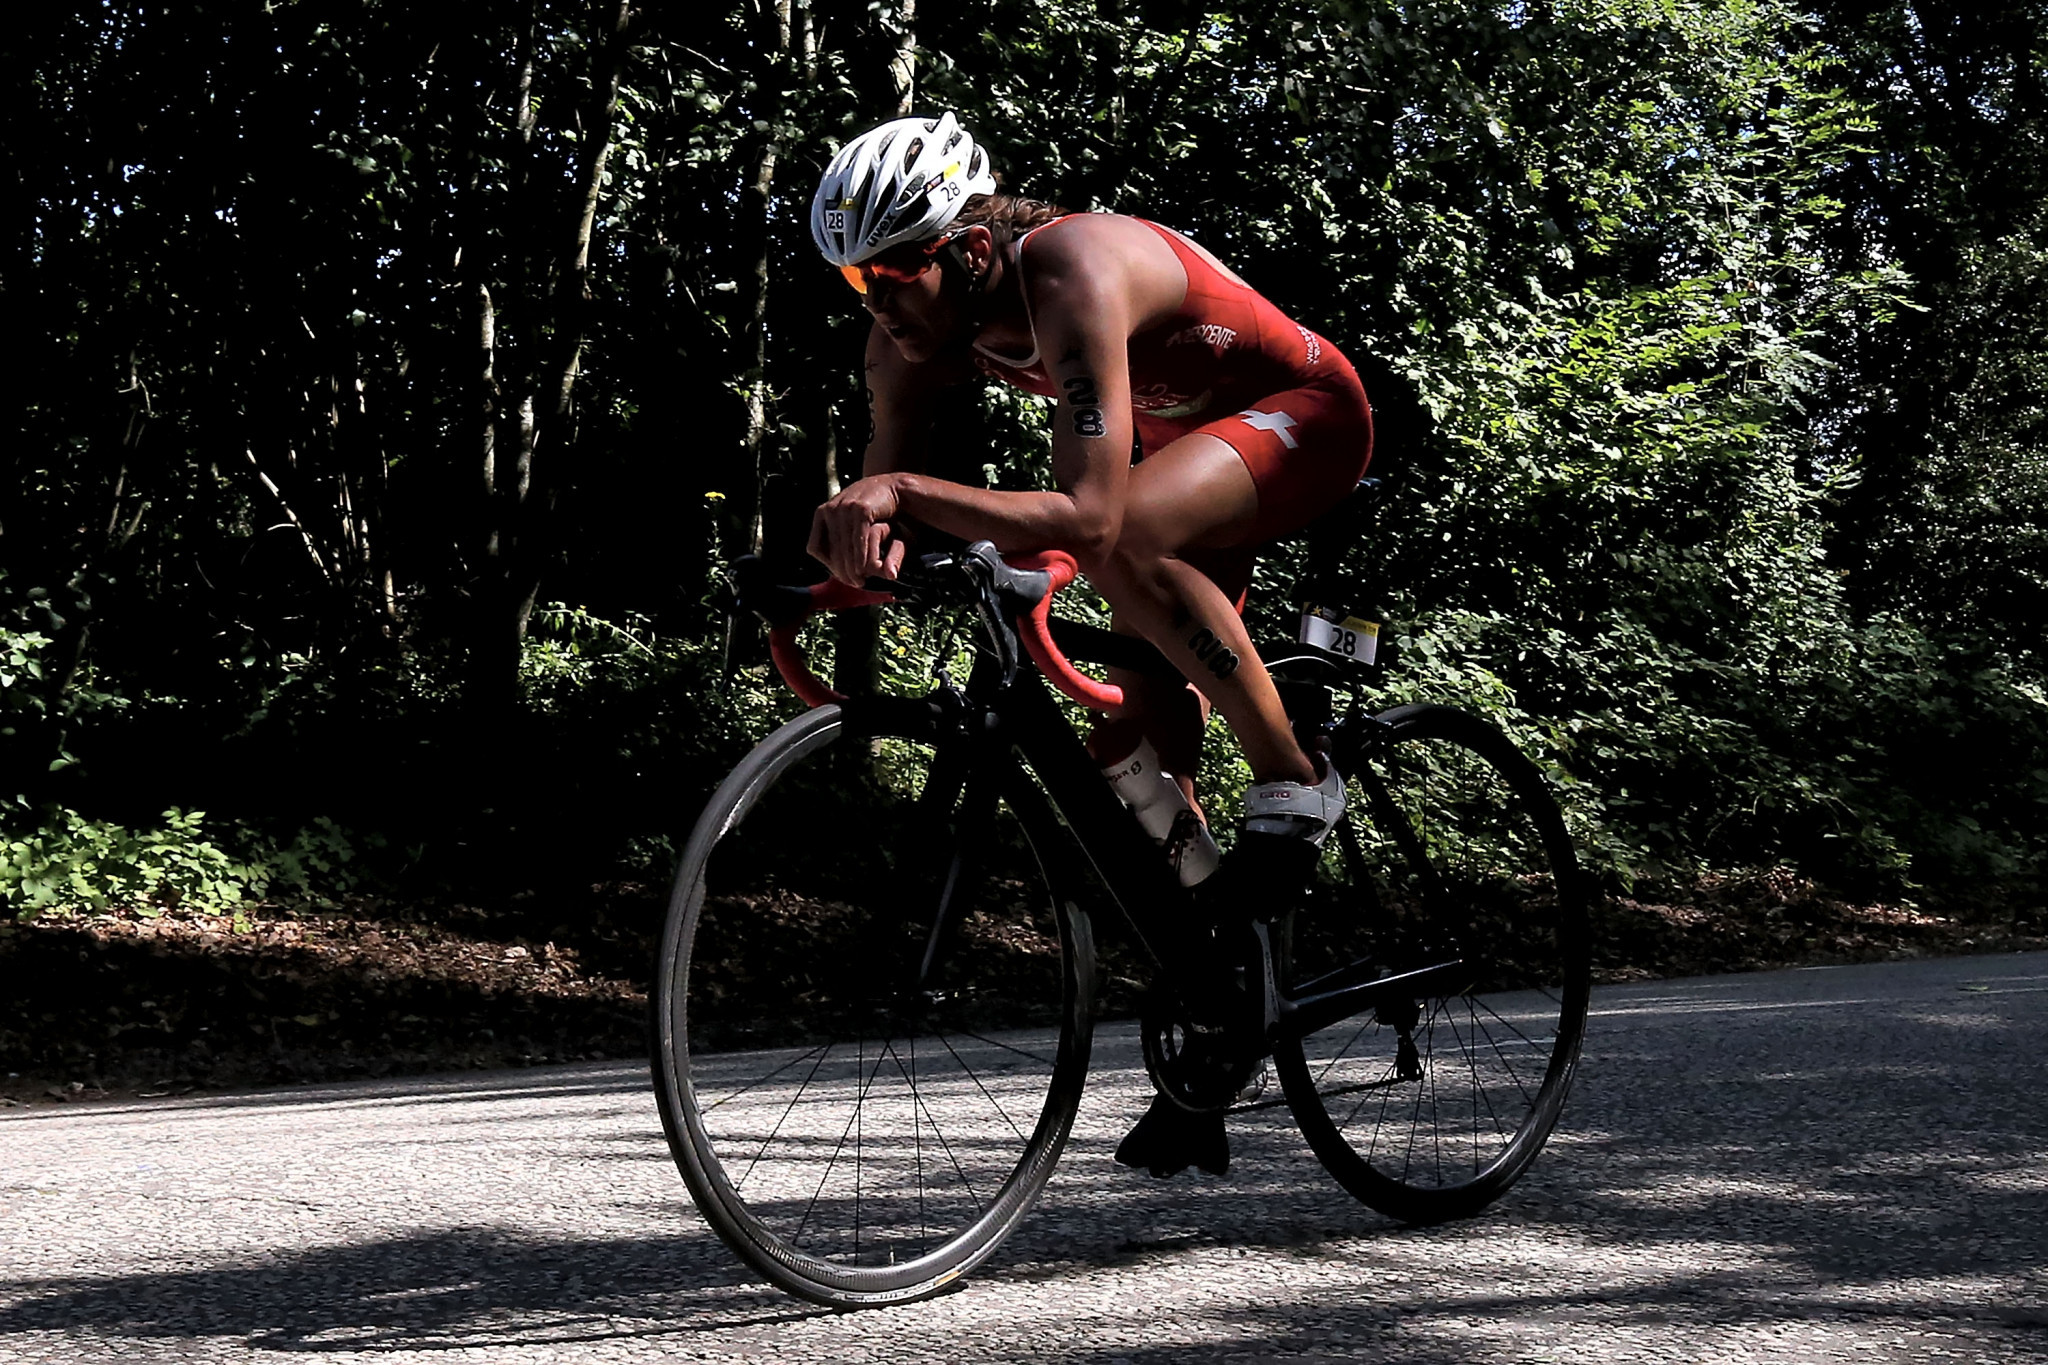 European champion Spirig aims for further success at ITU World Cup in Lausanne